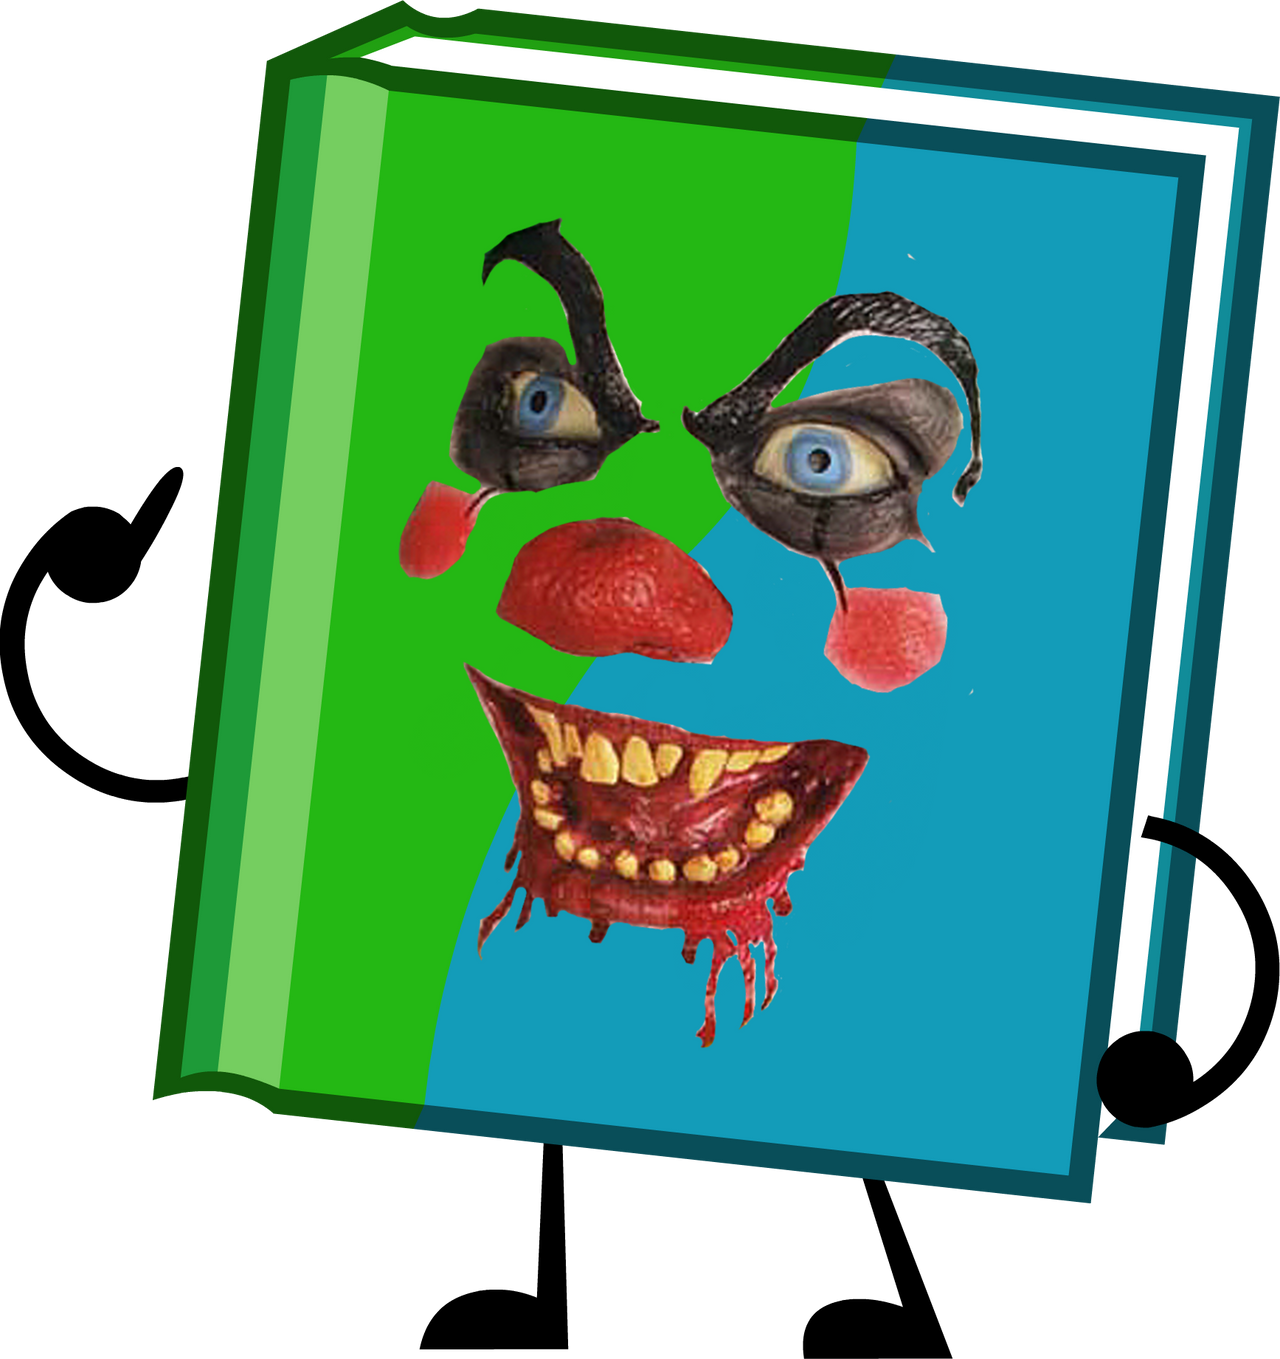 Cursed roblox face 3 by NeviWafers on DeviantArt